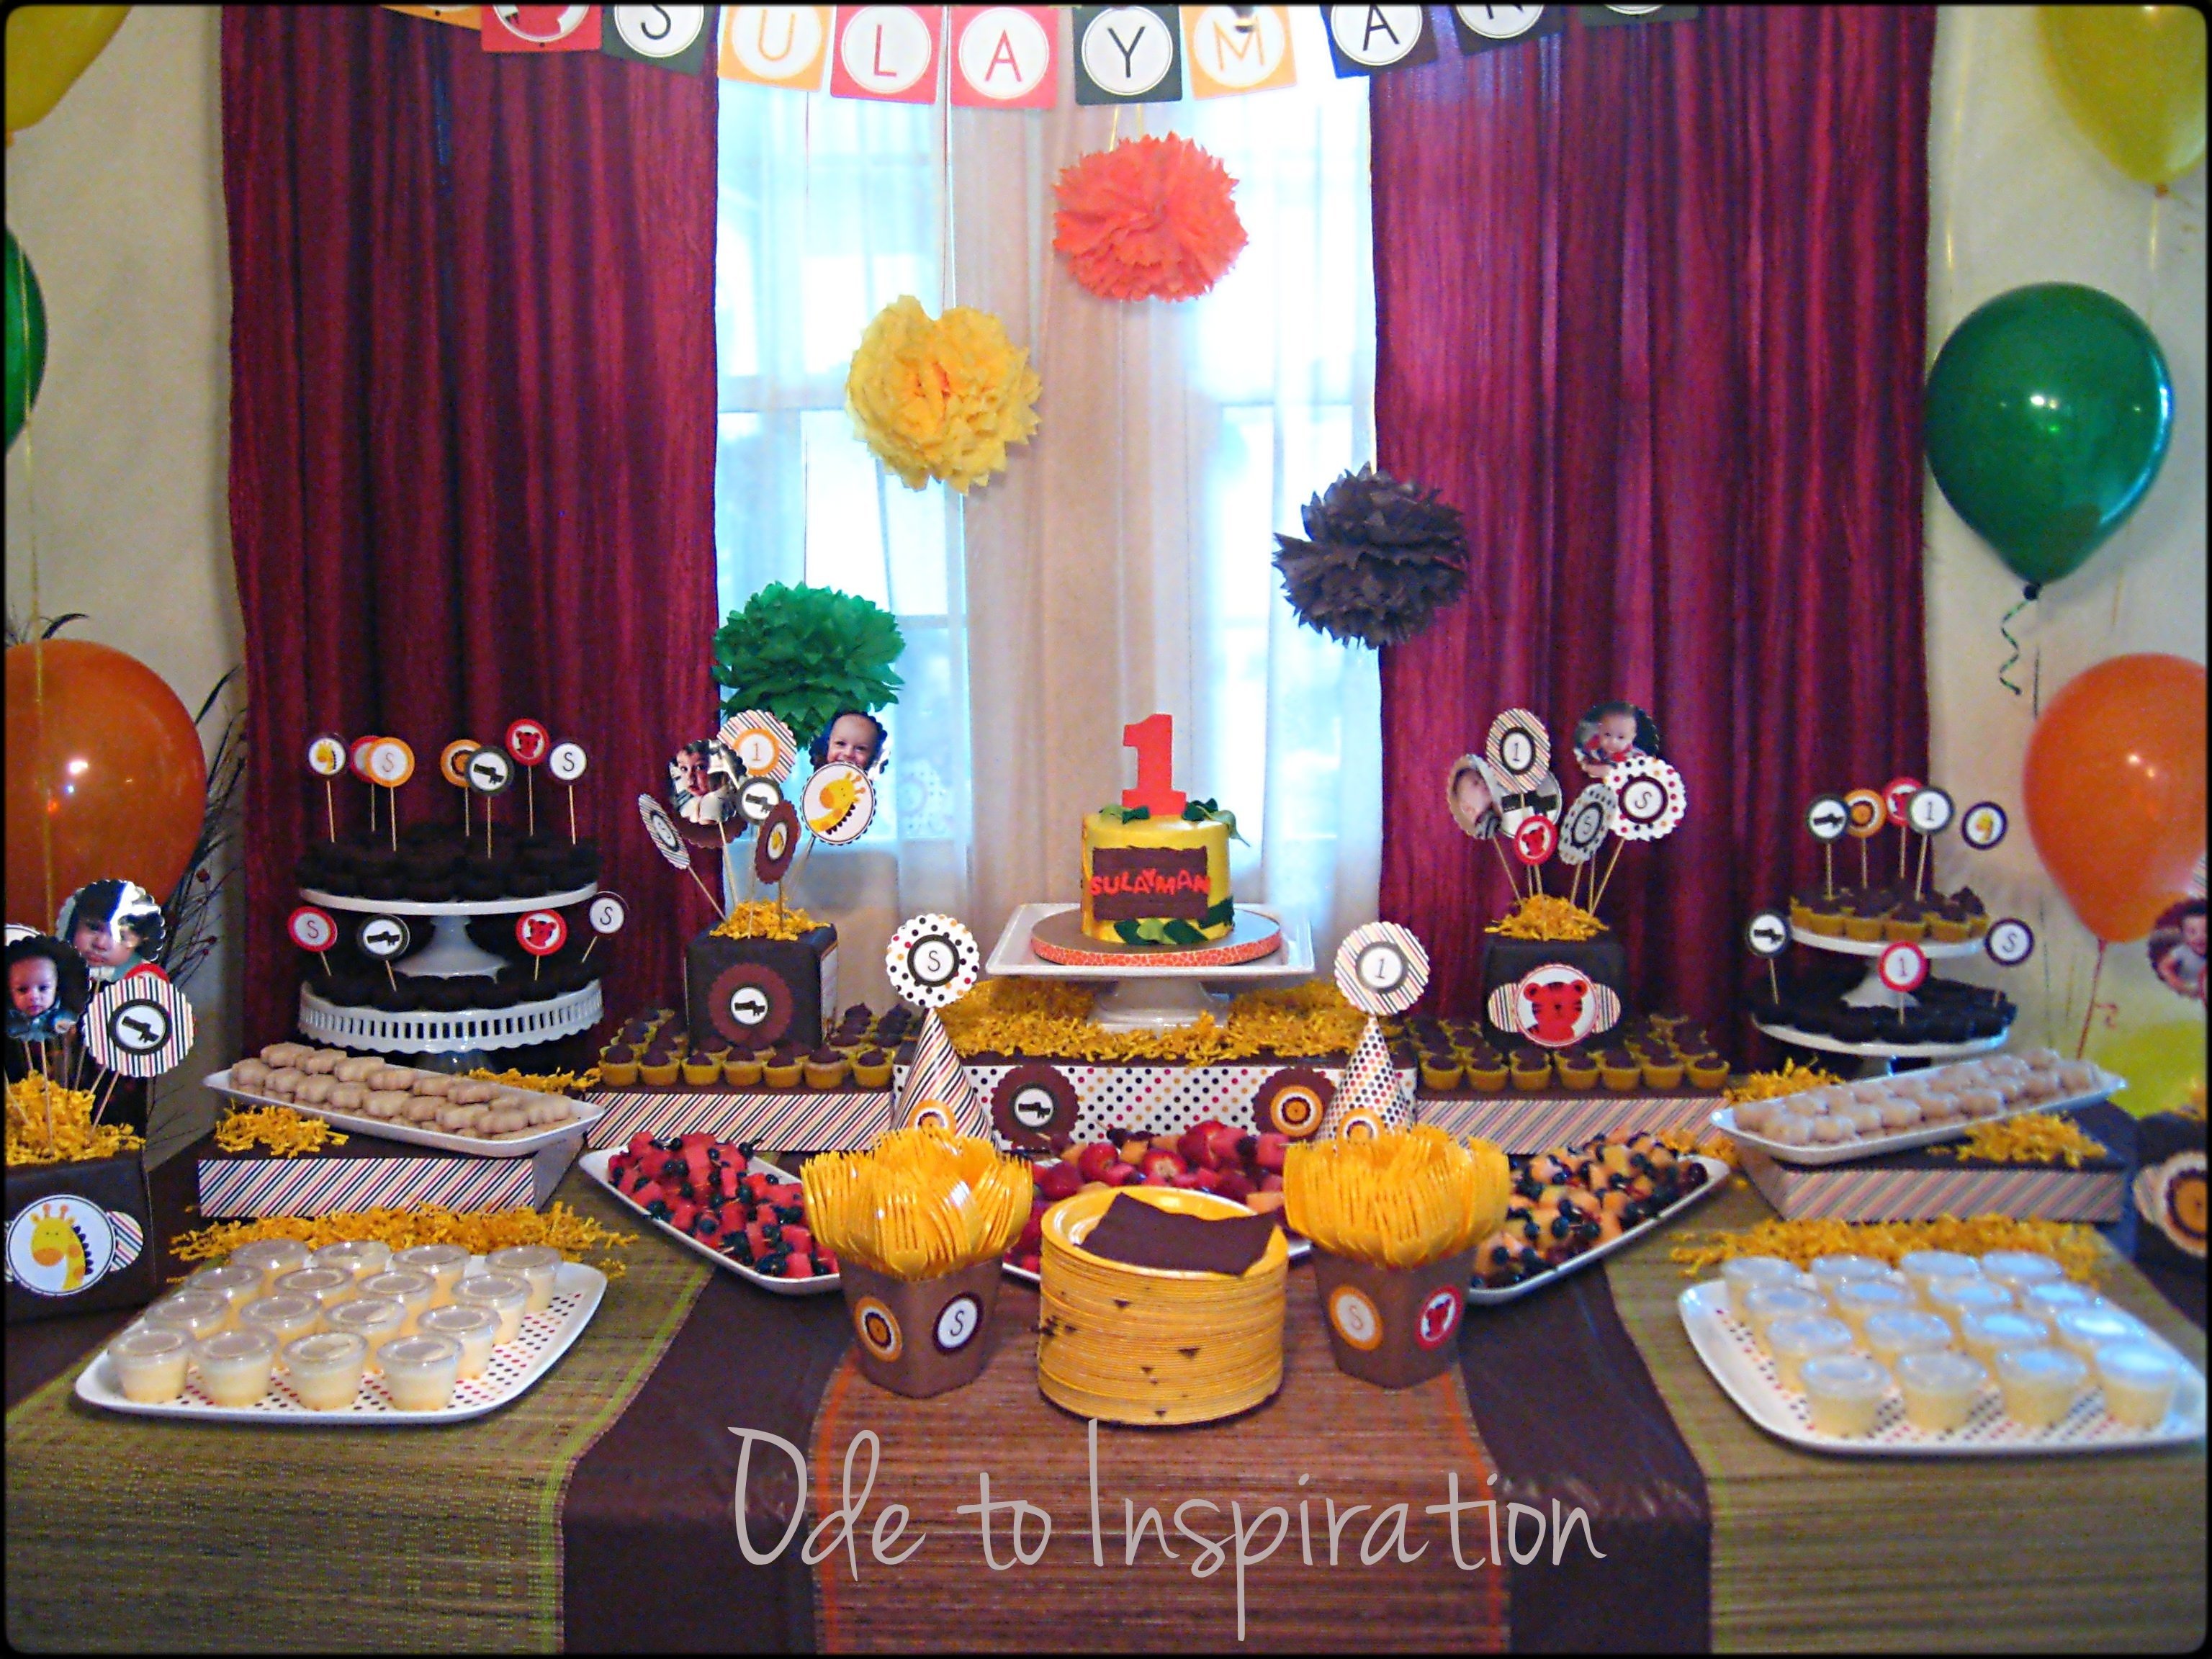 10 Great Themed Party Ideas For Adults birthday house party ideas for adults 5 2022